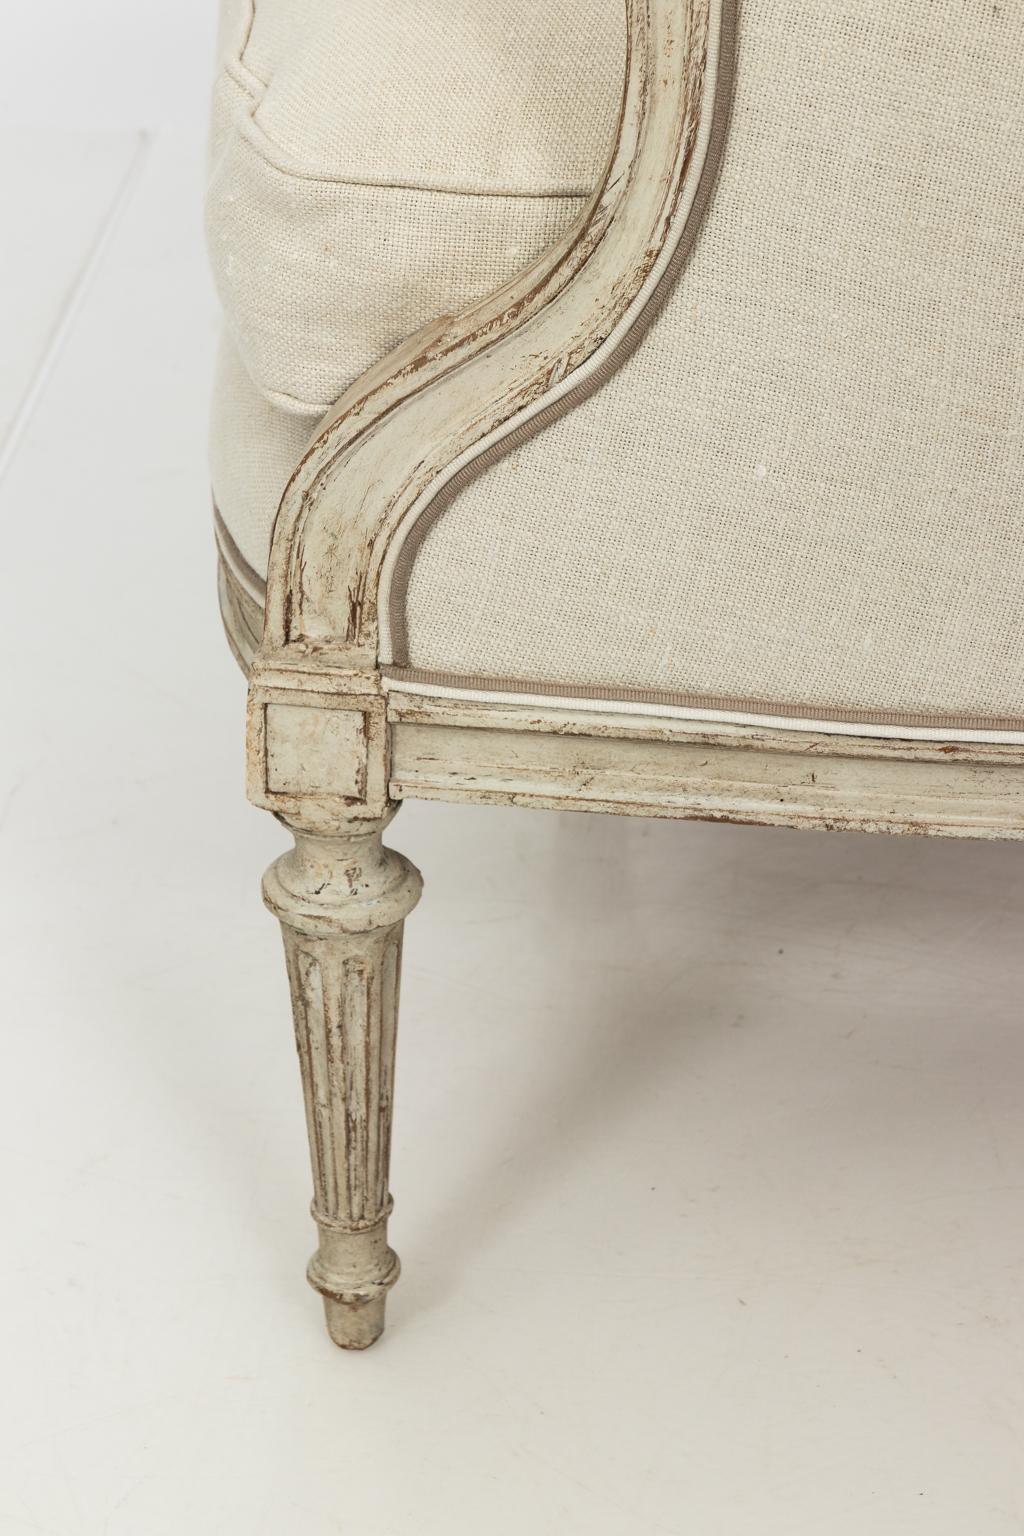 White painted bergere chair from France with curved, fluted trim back and custom white upholstery, circa 19th century.
 